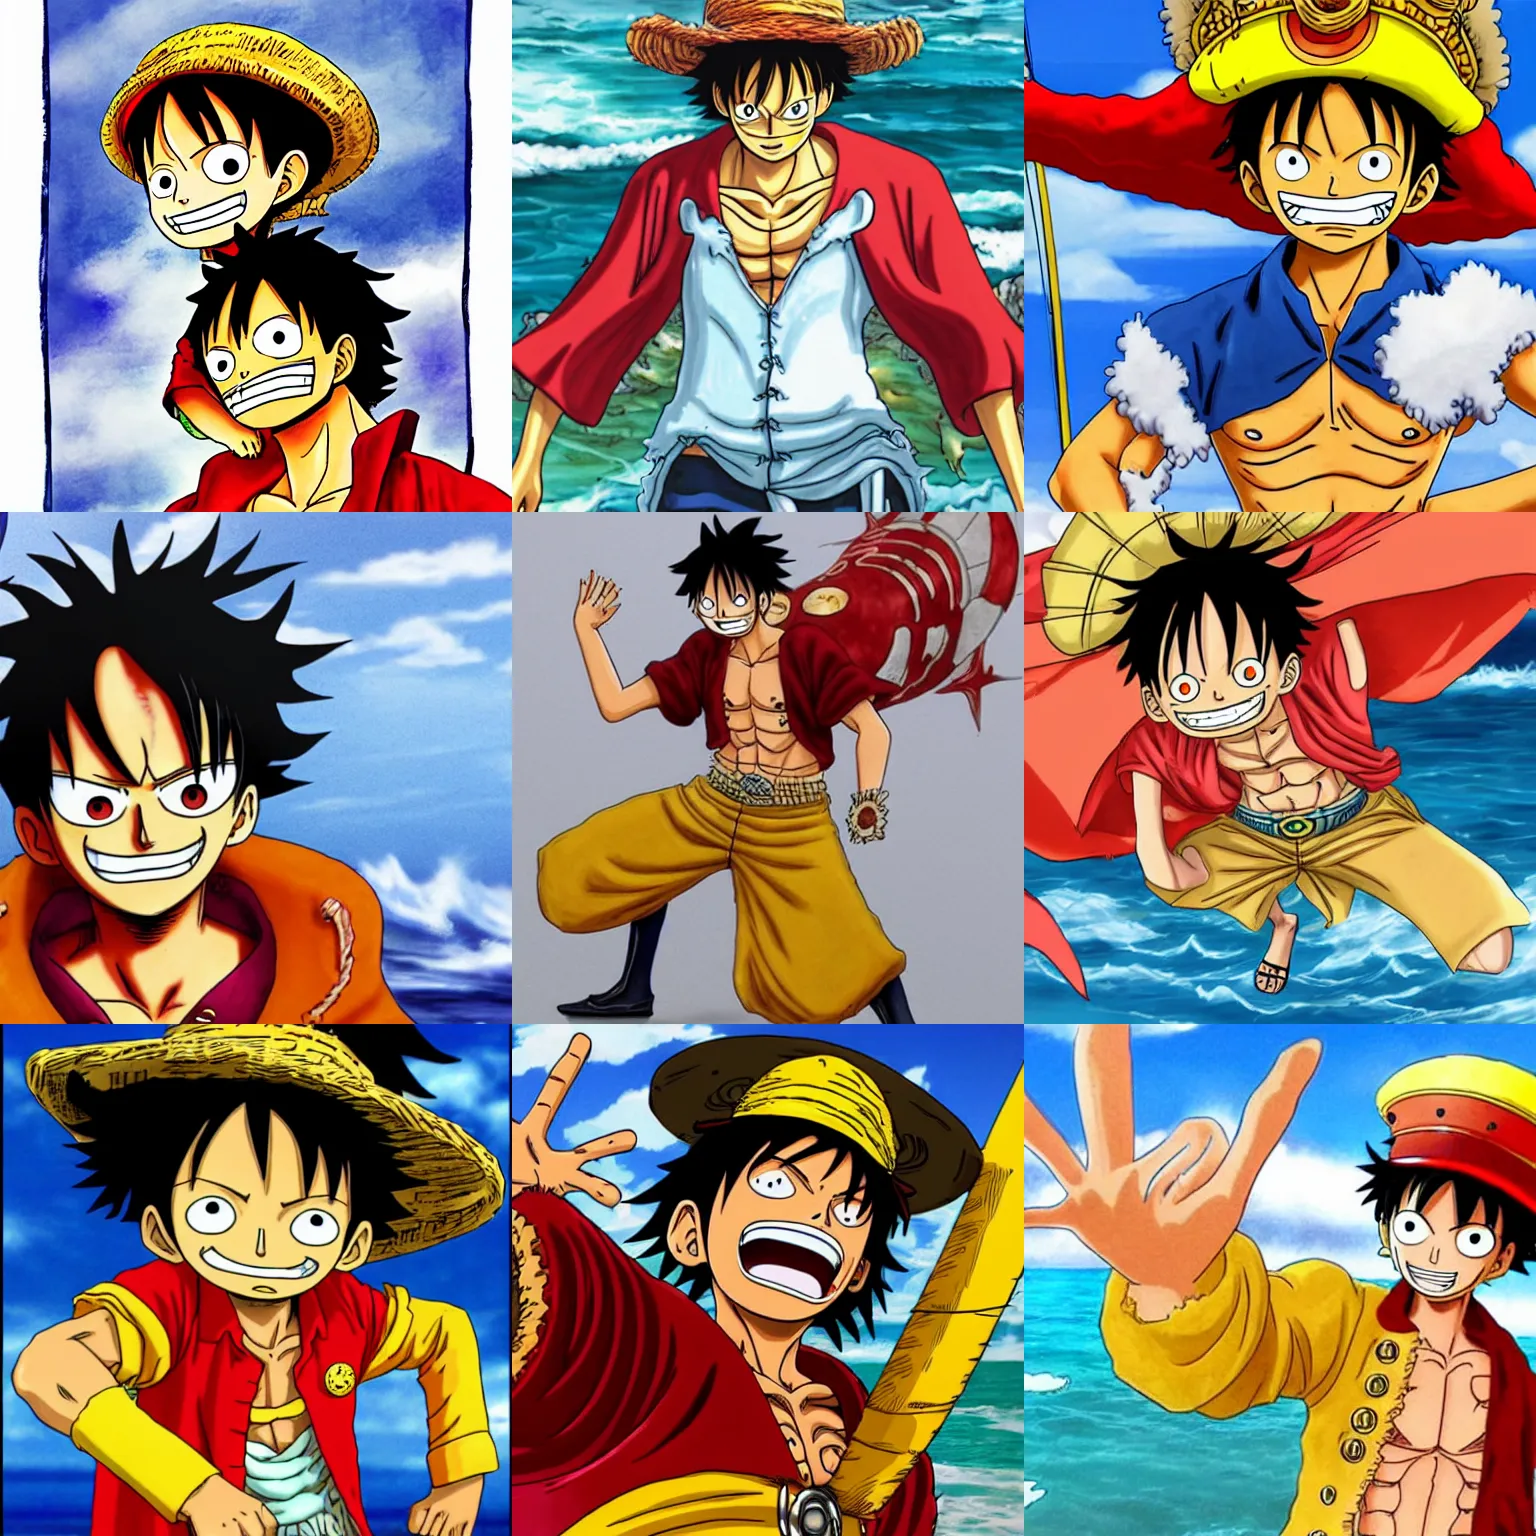 Legend Pirate Luffy Oil Painted, One Piece - Anime Legendary NFT Heroes